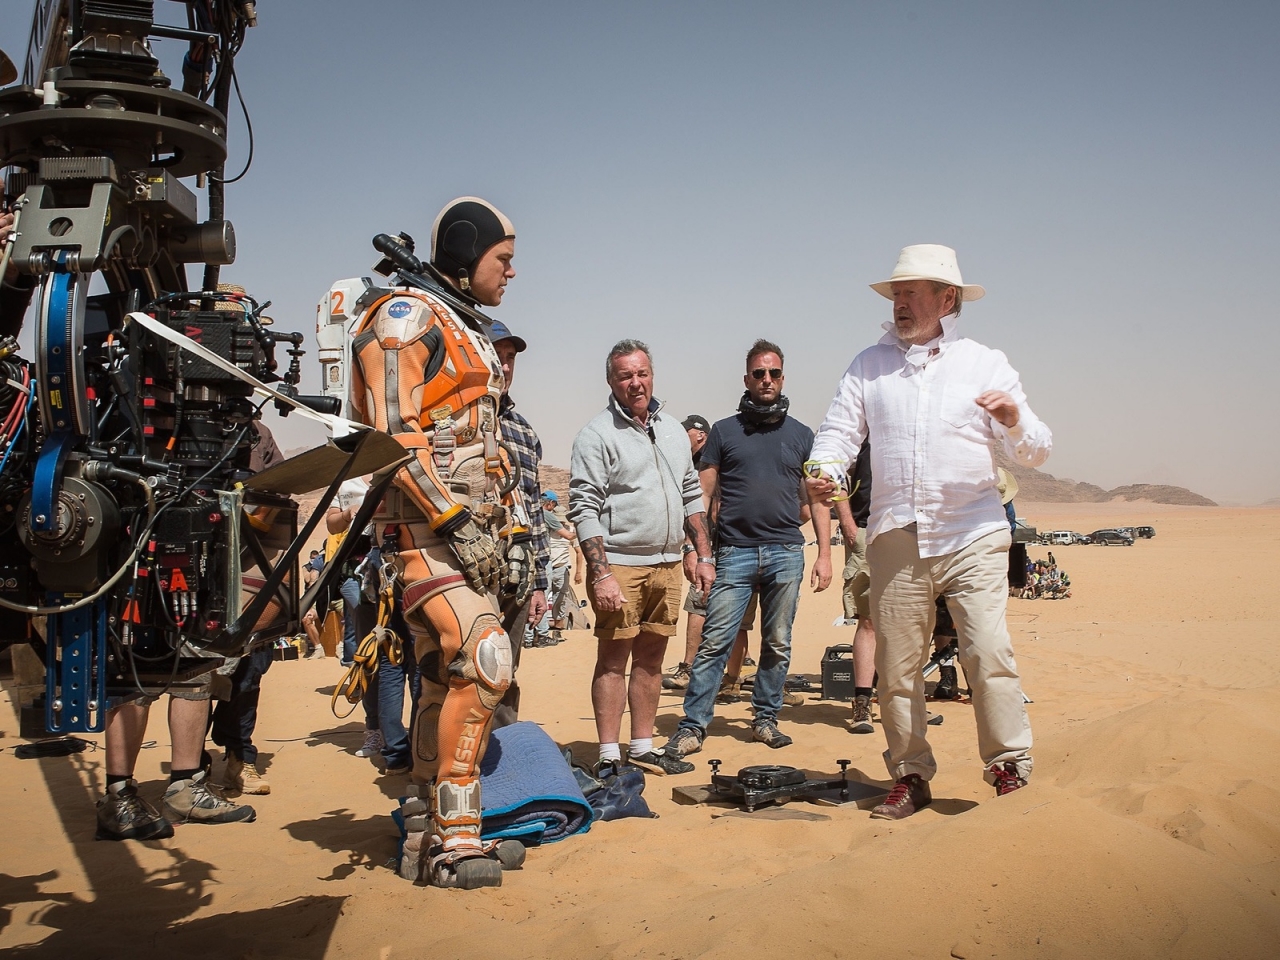 The Martian Directing for 1280 x 960 resolution